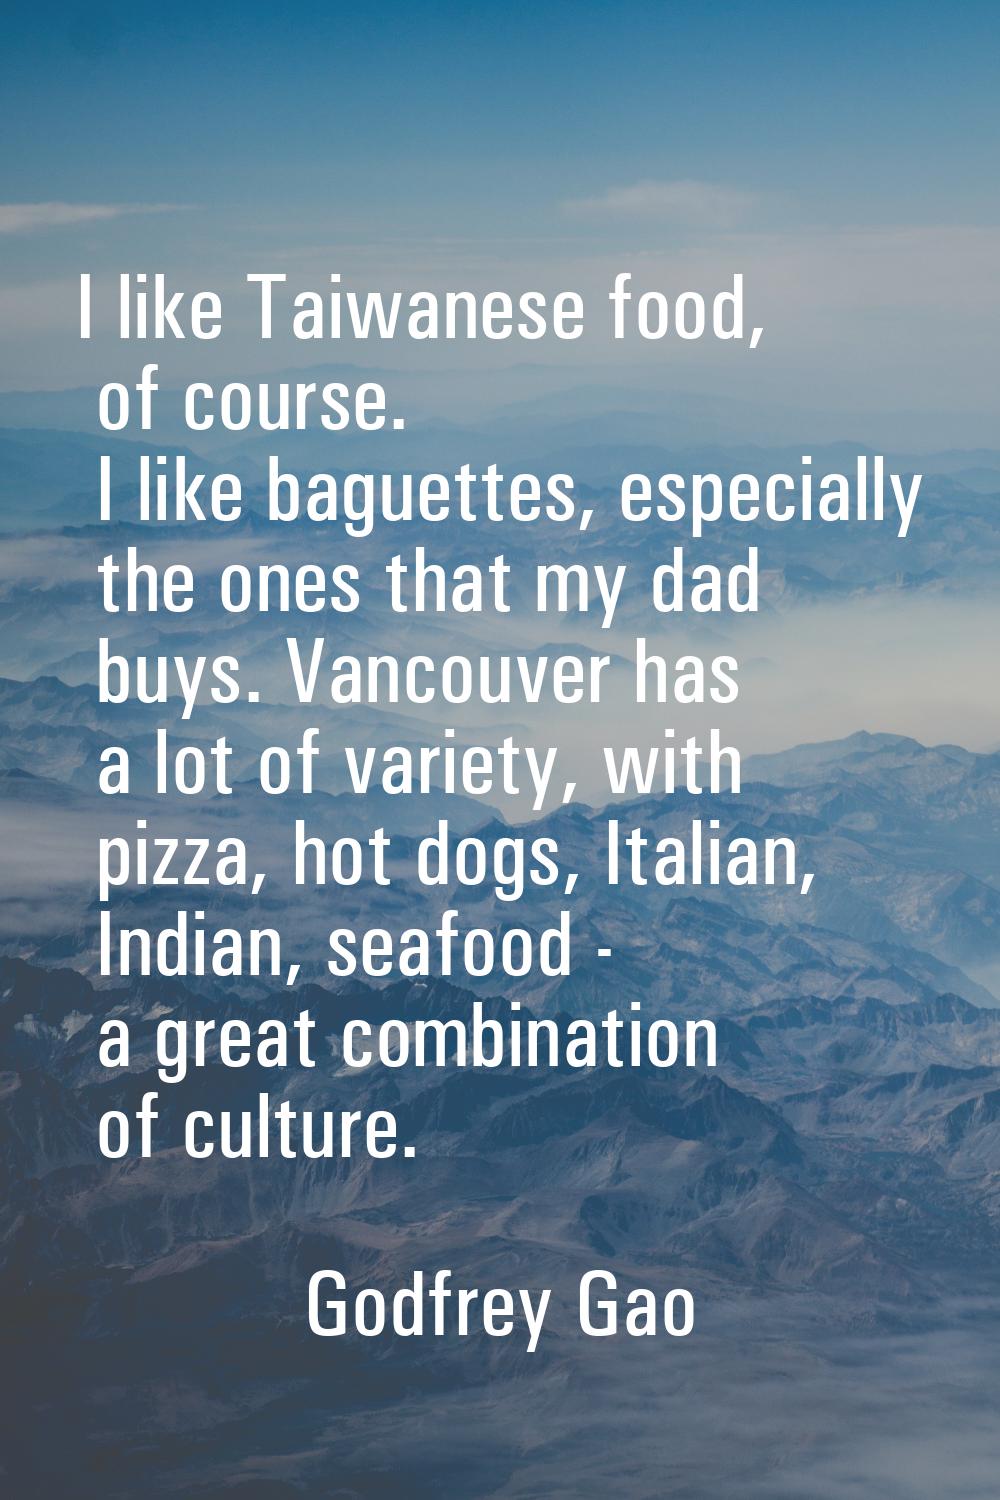 I like Taiwanese food, of course. I like baguettes, especially the ones that my dad buys. Vancouver